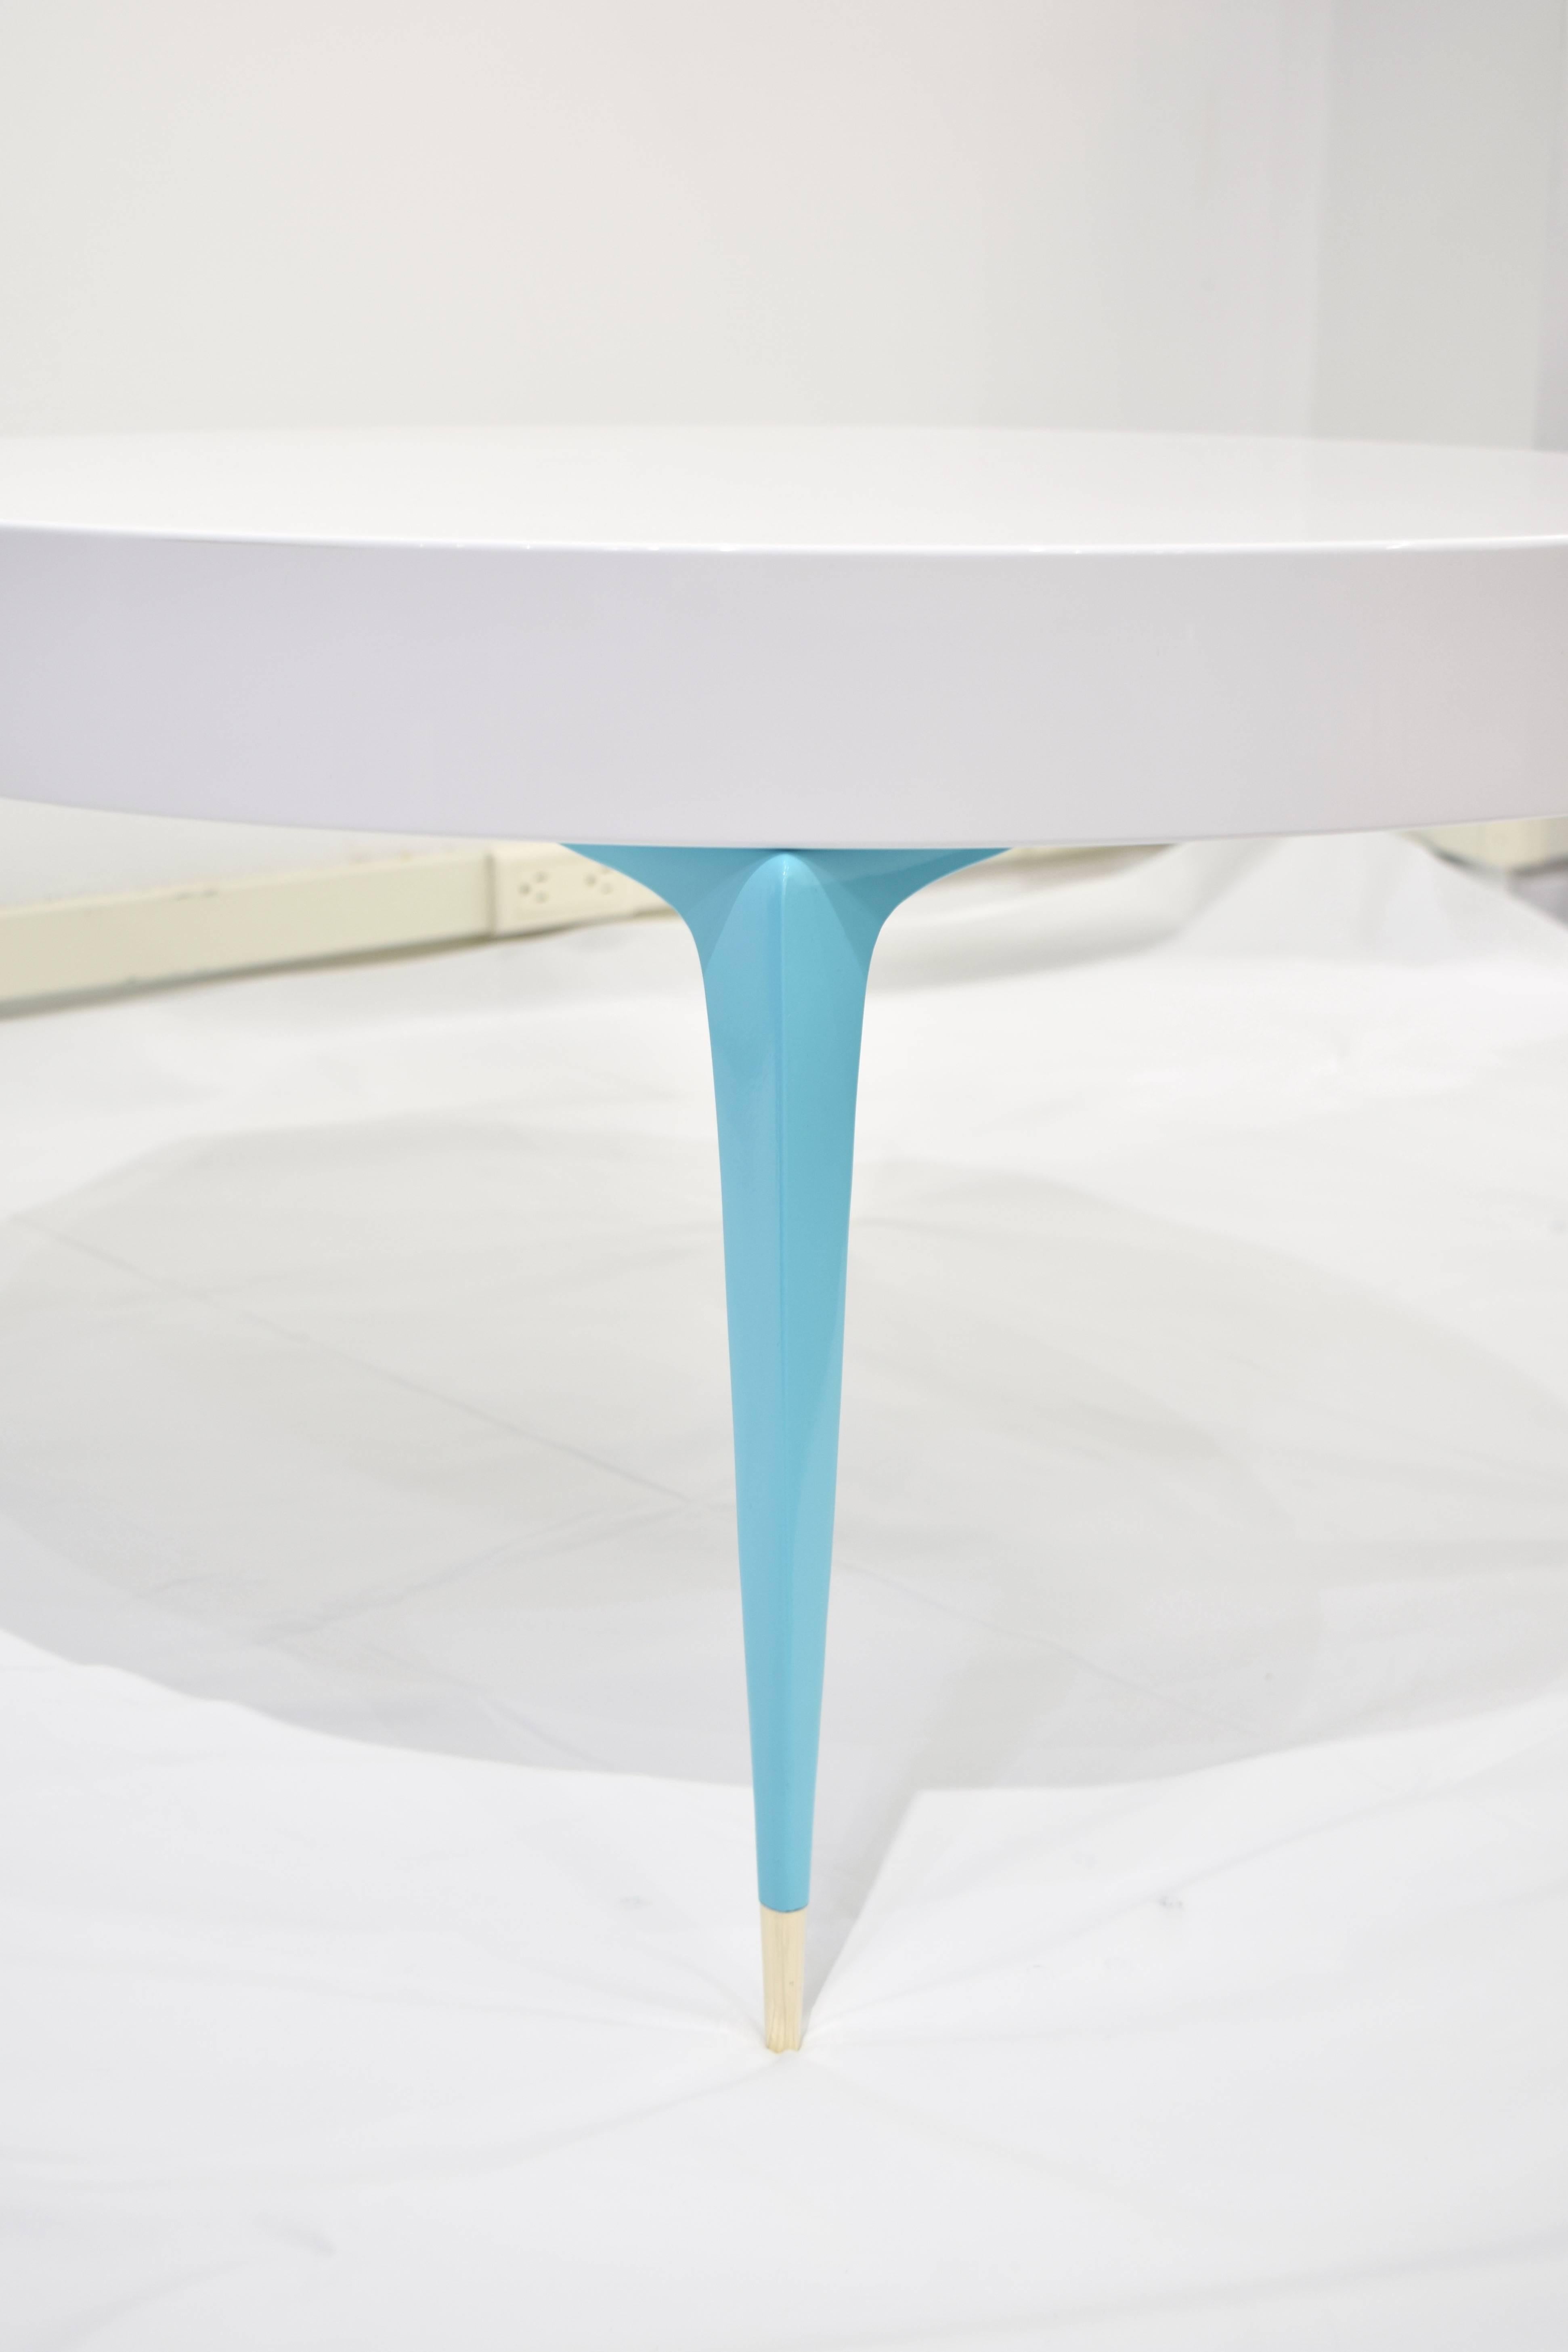 A playfully elegant Electra coffee table designed by Irwin Feld Design for CF Modern apart of our fully customizable Stiletto Collection. A high-gloss, white lacquered top set atop four powder-coated brass in Tiffany blue 